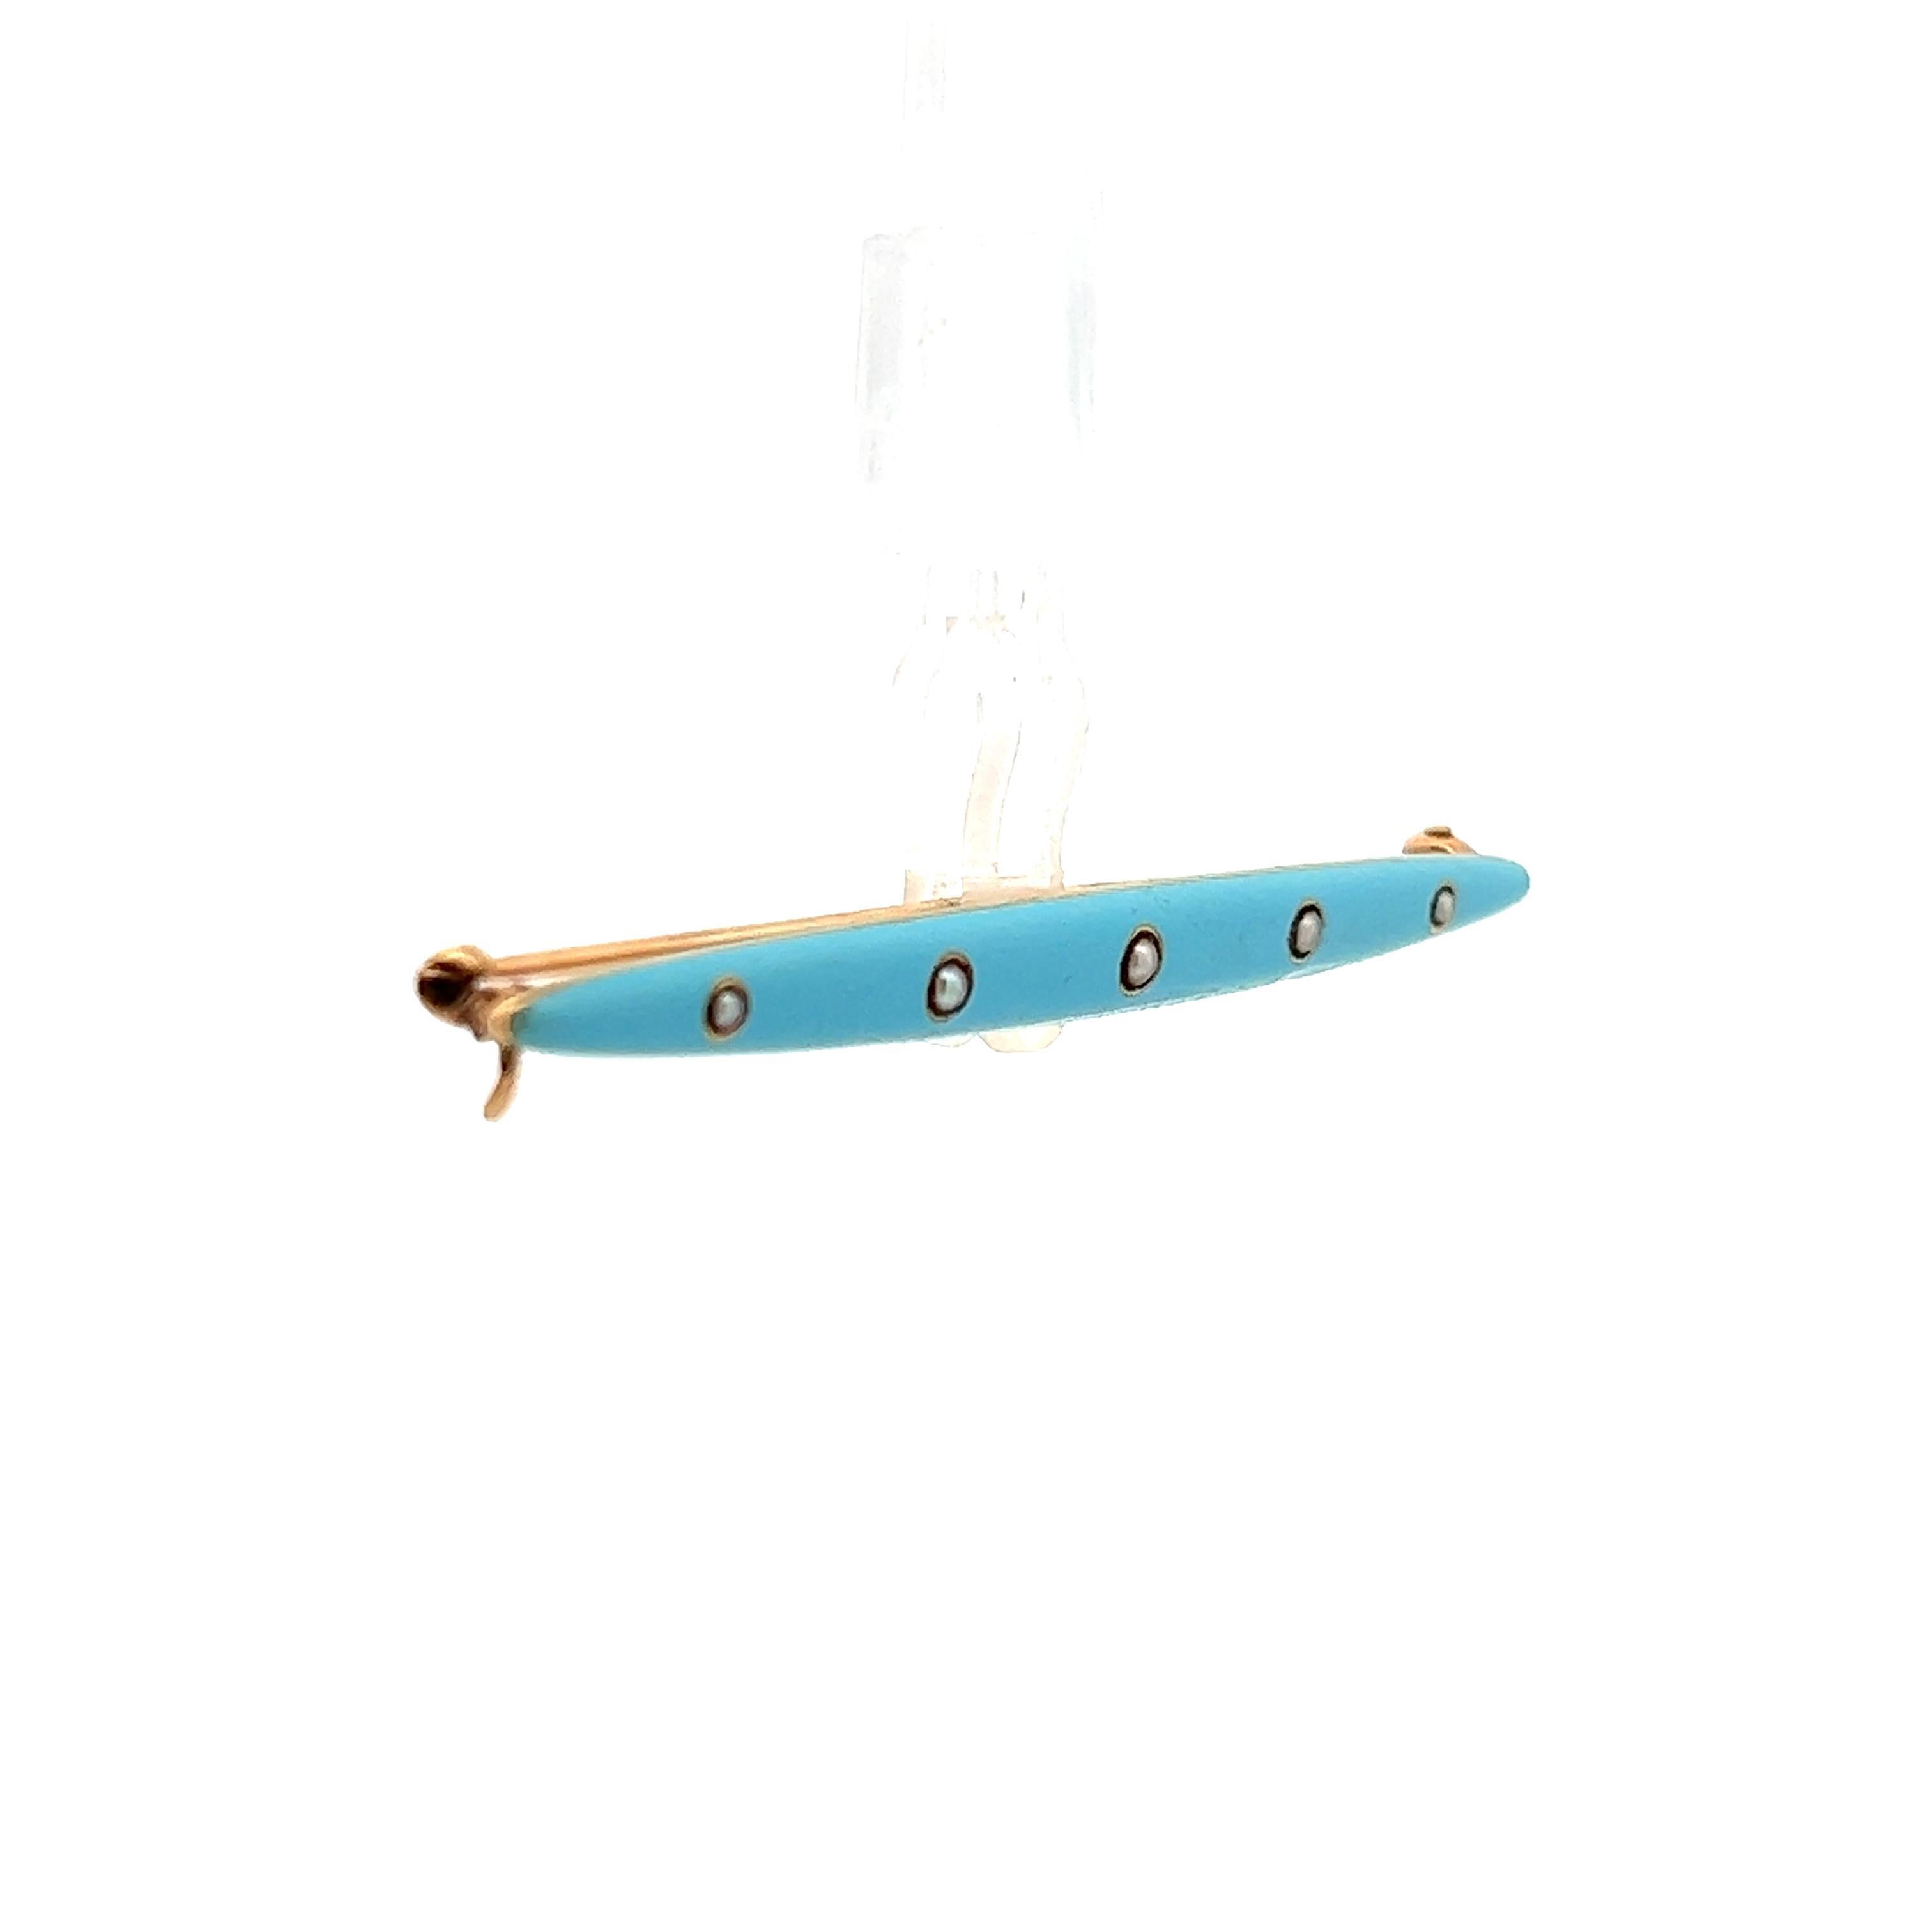 This exquisite pearl bar pin comes from 1910 Edwardian and is made with blue enamel and 14k yellow gold. The combination of baby blue enamel and lustrous pearls is soft and pleasing to the eyes, maintaining a stunning visual appeal. The design is